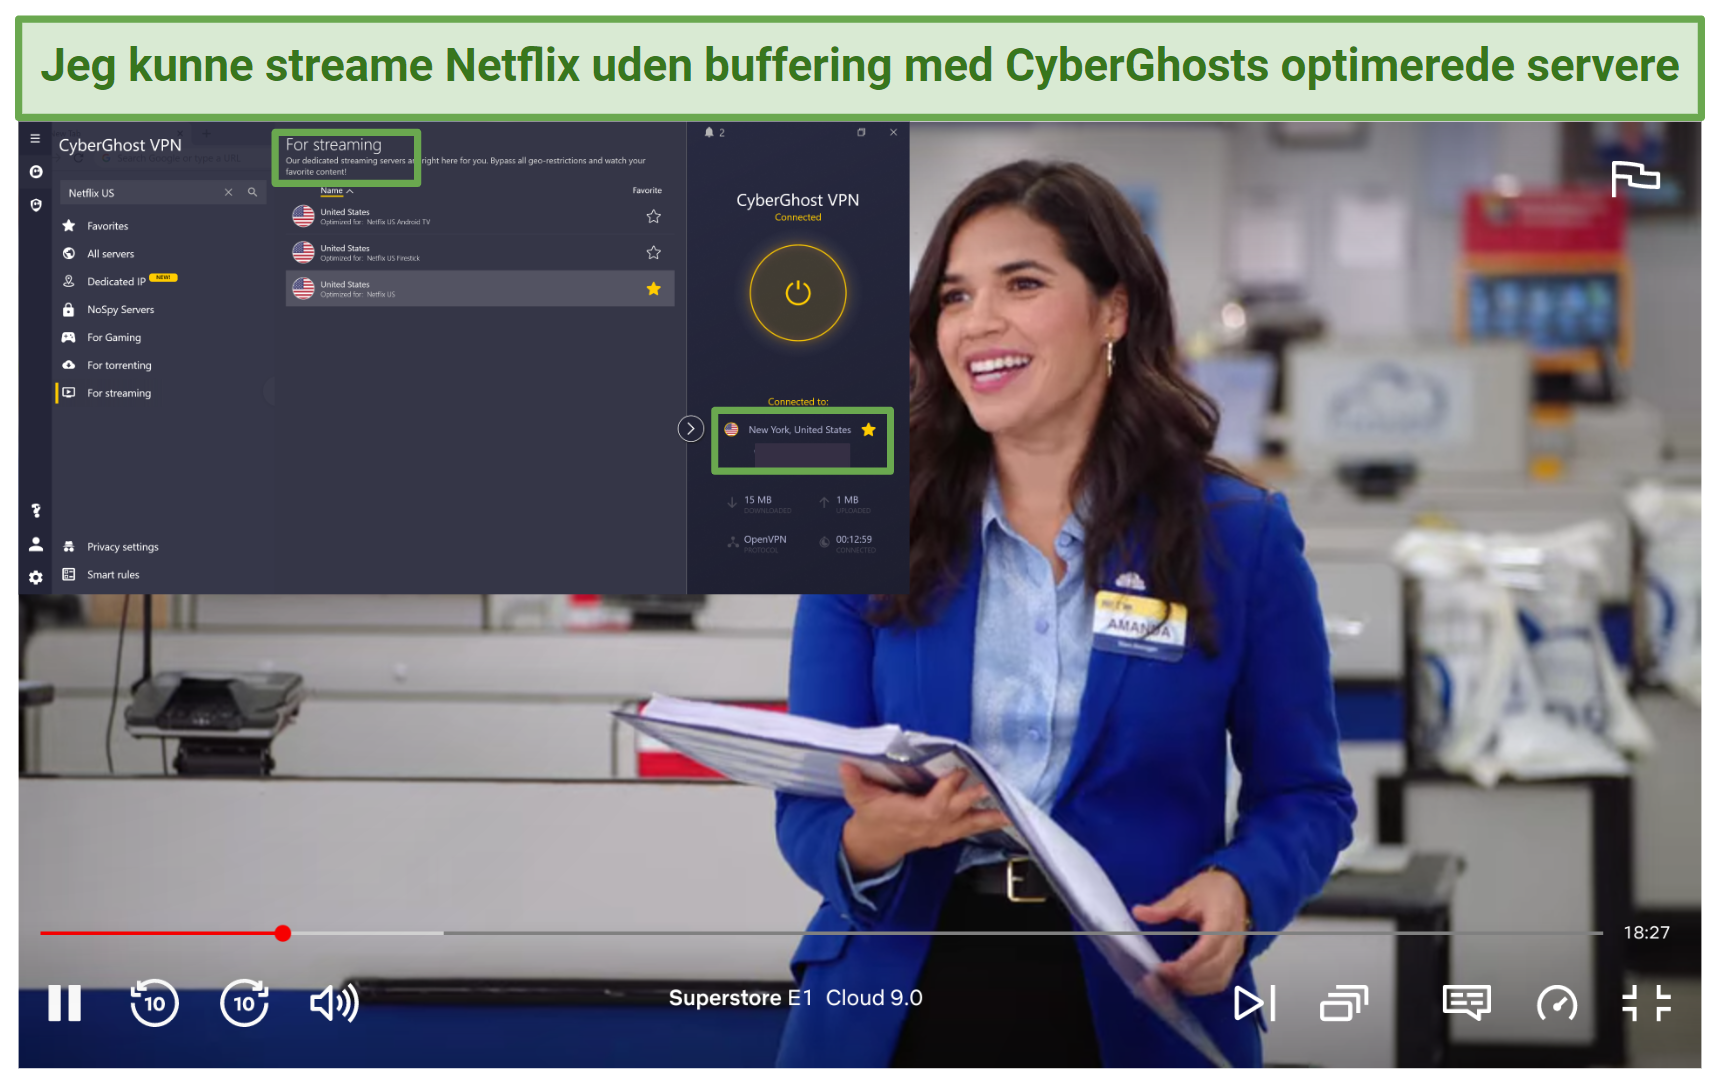 CyberGhost's streaming optimized servers for Netflix